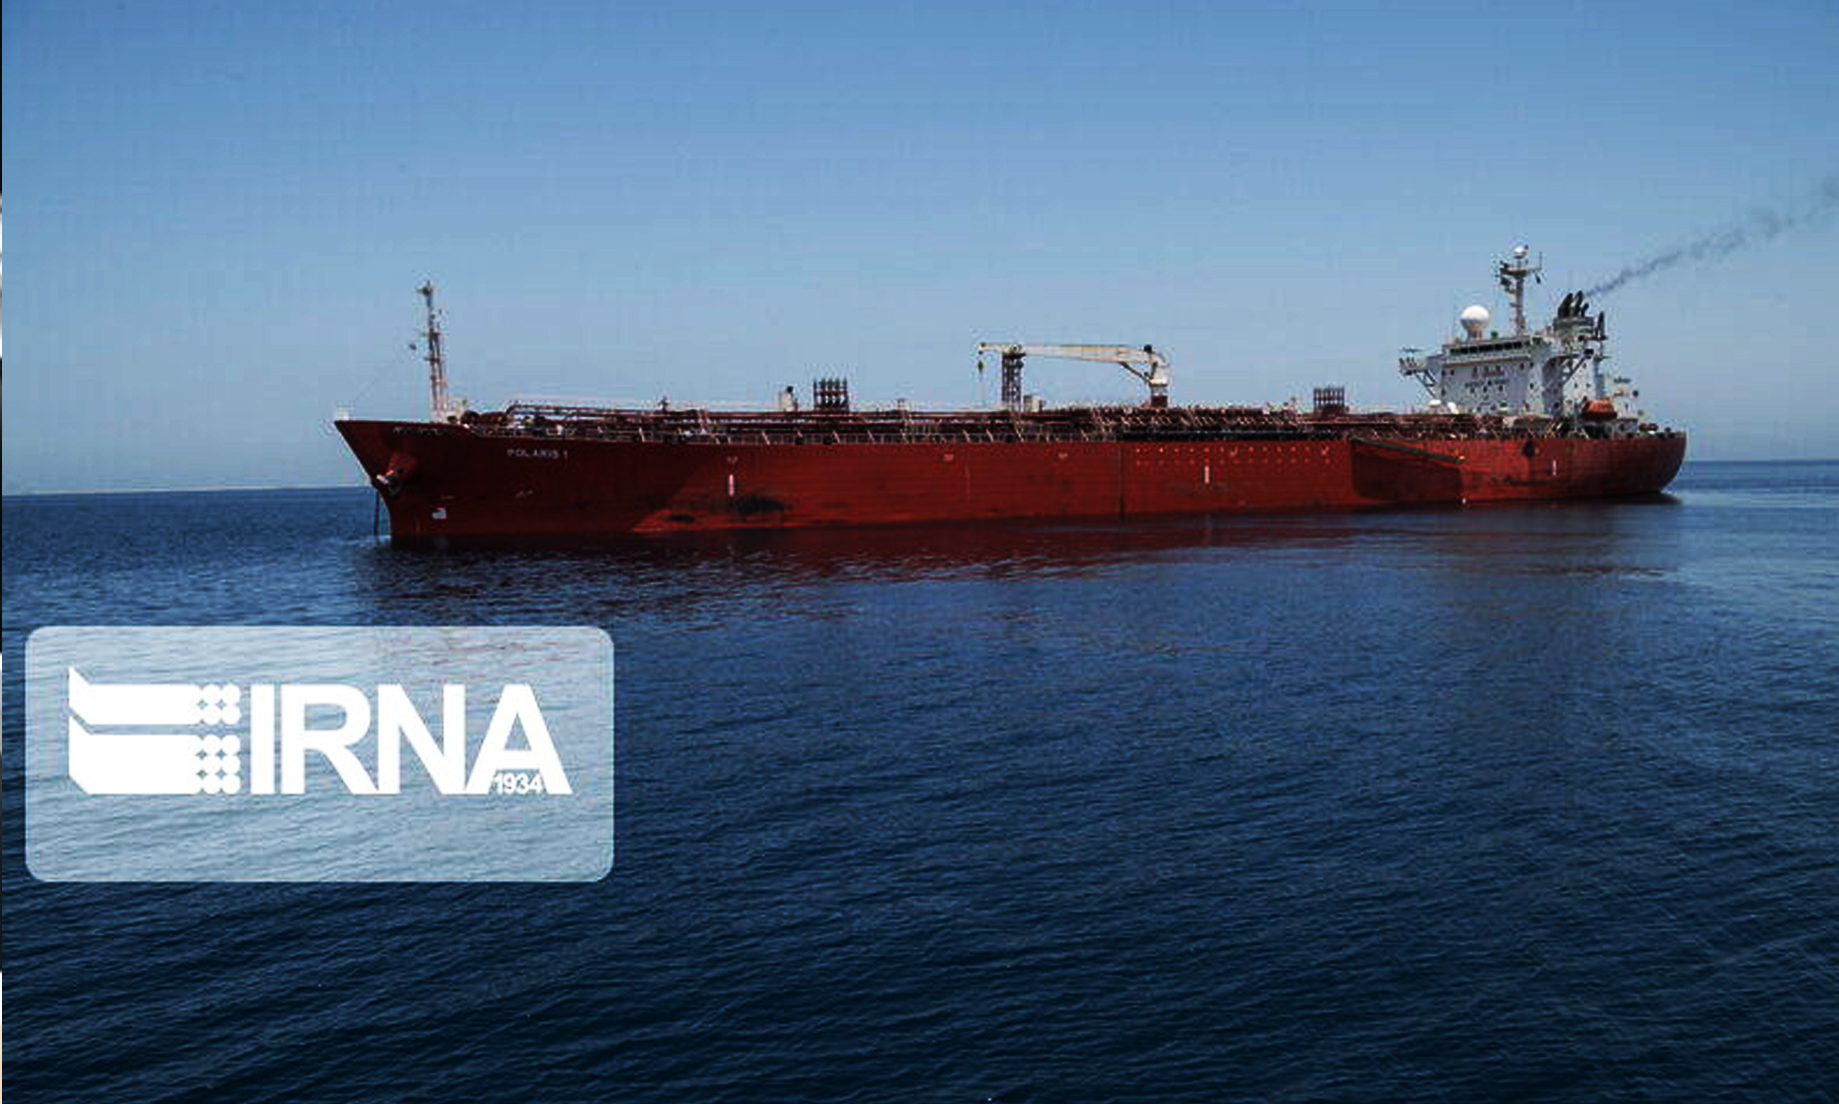 UK seizure of Iranian oil tanker amounts to sea piracy: Official